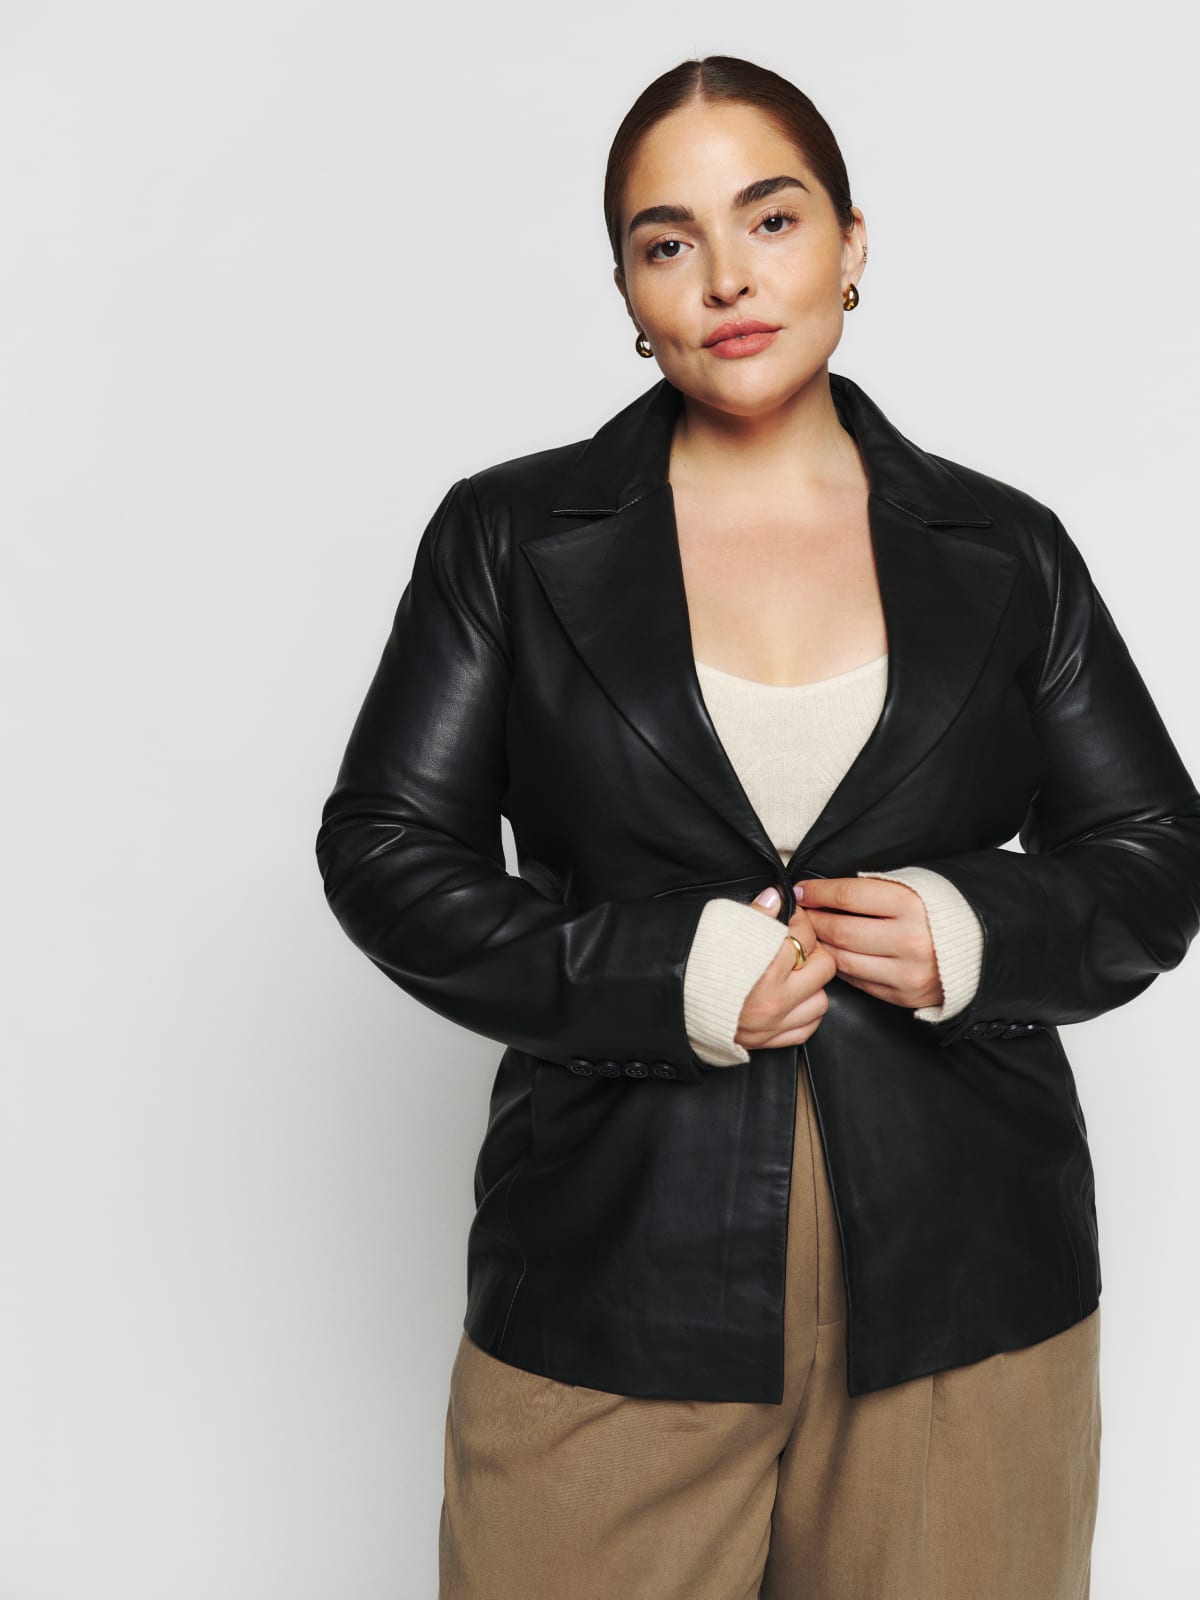 It's jacket season. The Veda black leather blazer is a single breasted, leather blazer with a notched lapel and a center front button. It is slim fitting and hits below the hip.